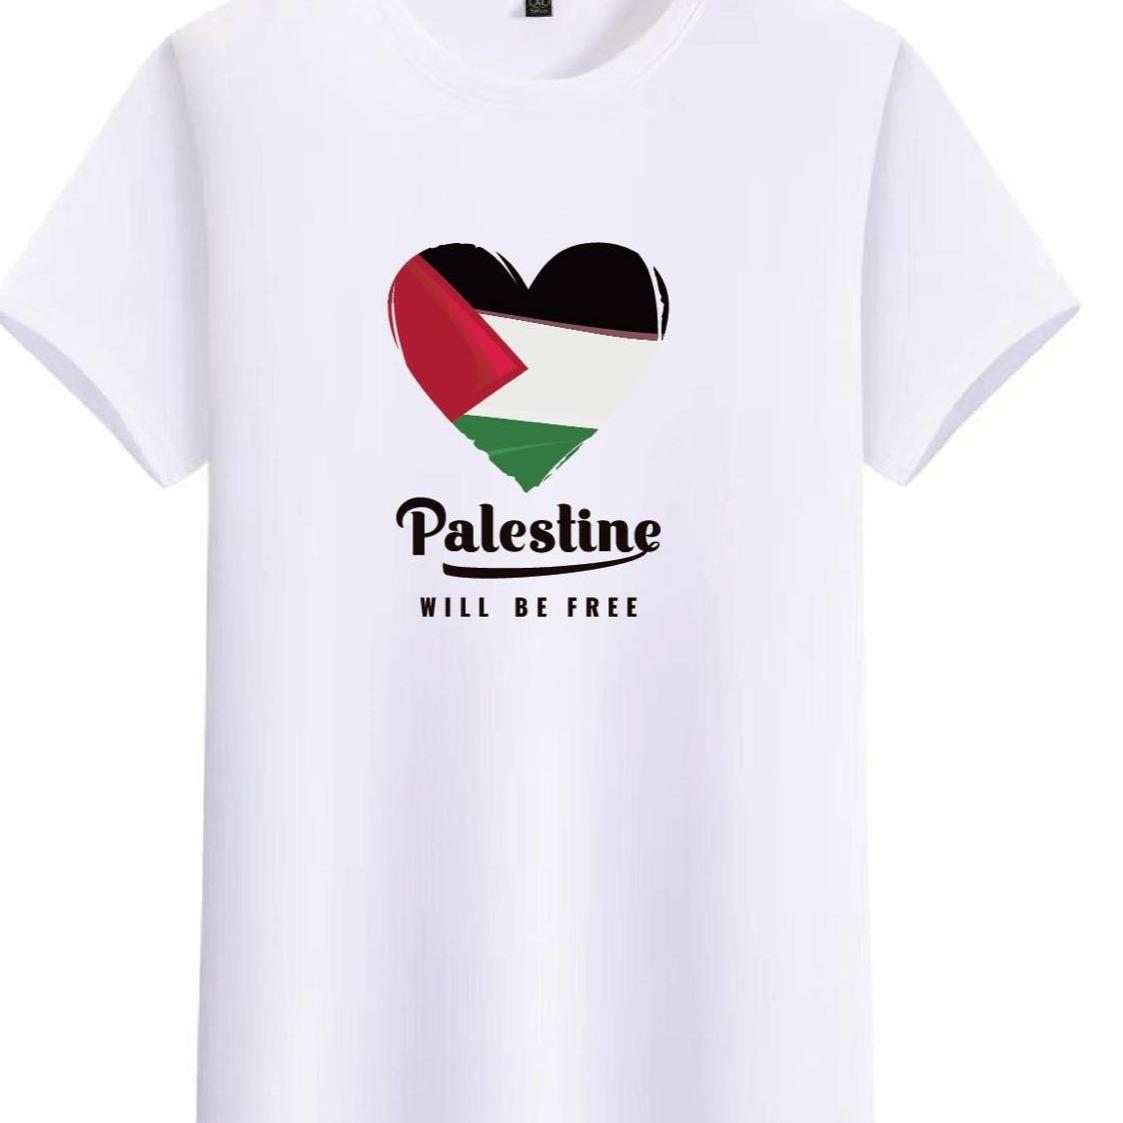 High-Quality "Palestine Will Be Free" Heart Design Shirt: 100% Cotton